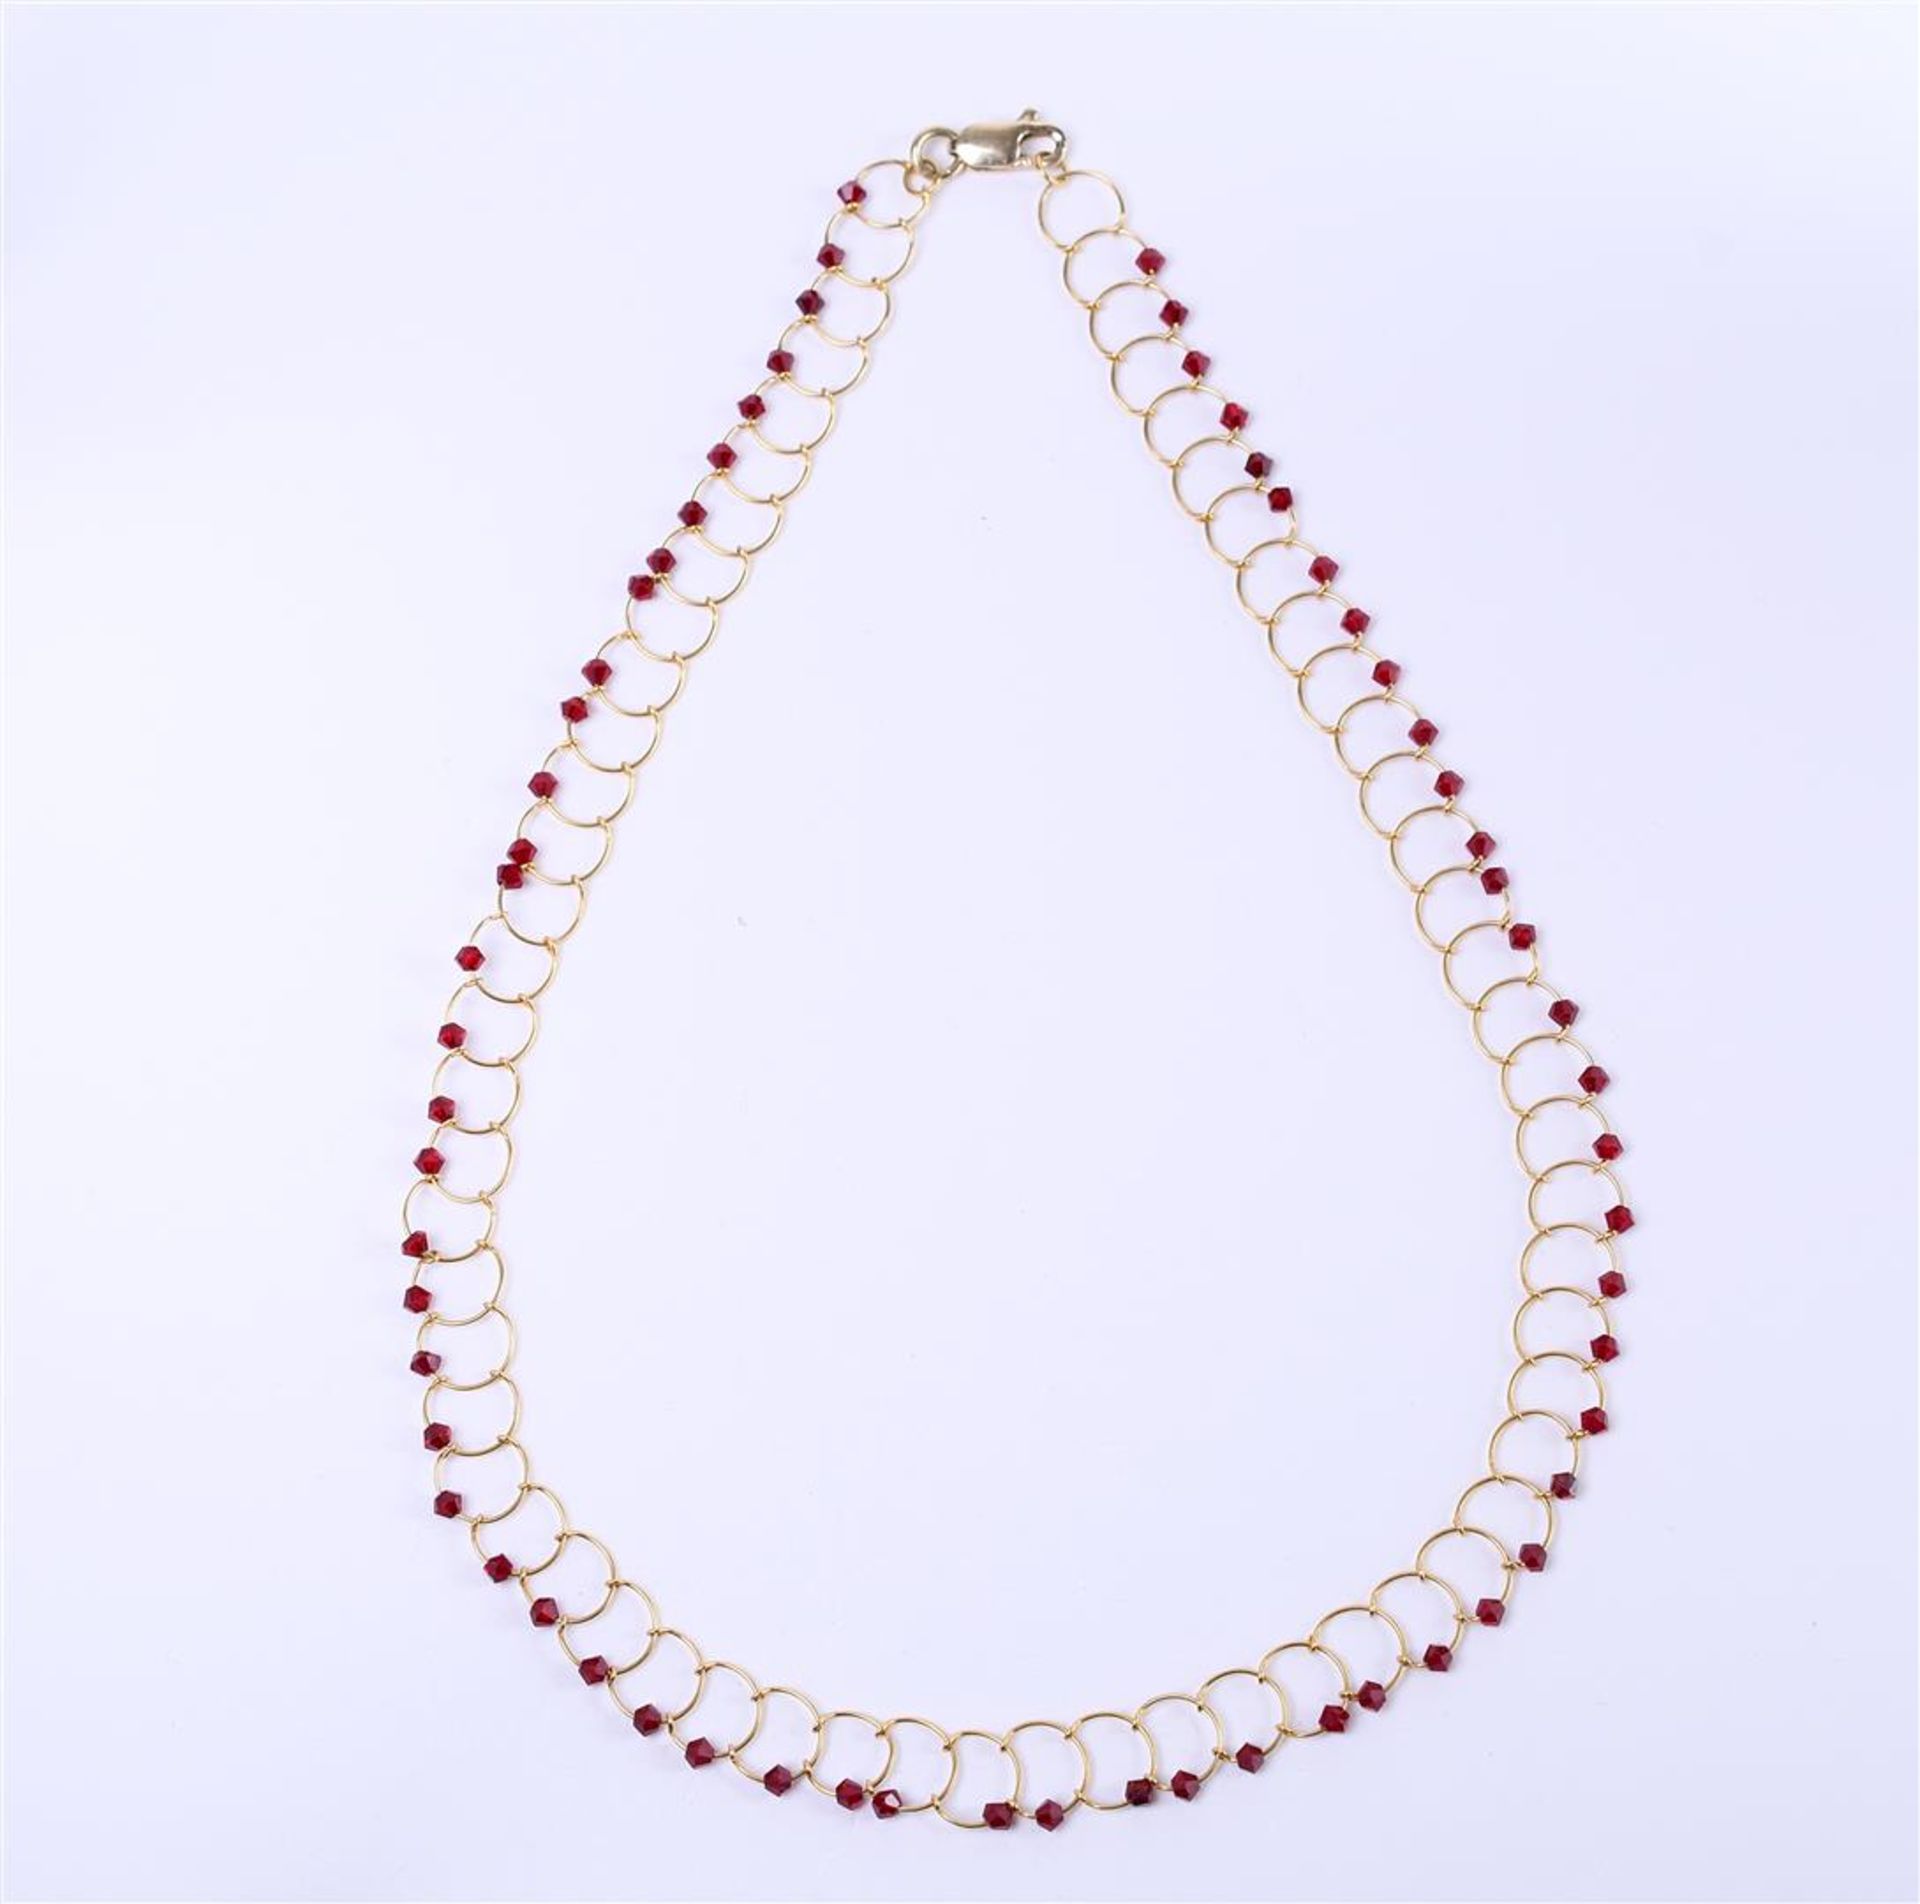 14 kt yellow gold wire necklace set with red crystal stones. Necklace length 41cm - Bild 2 aus 6